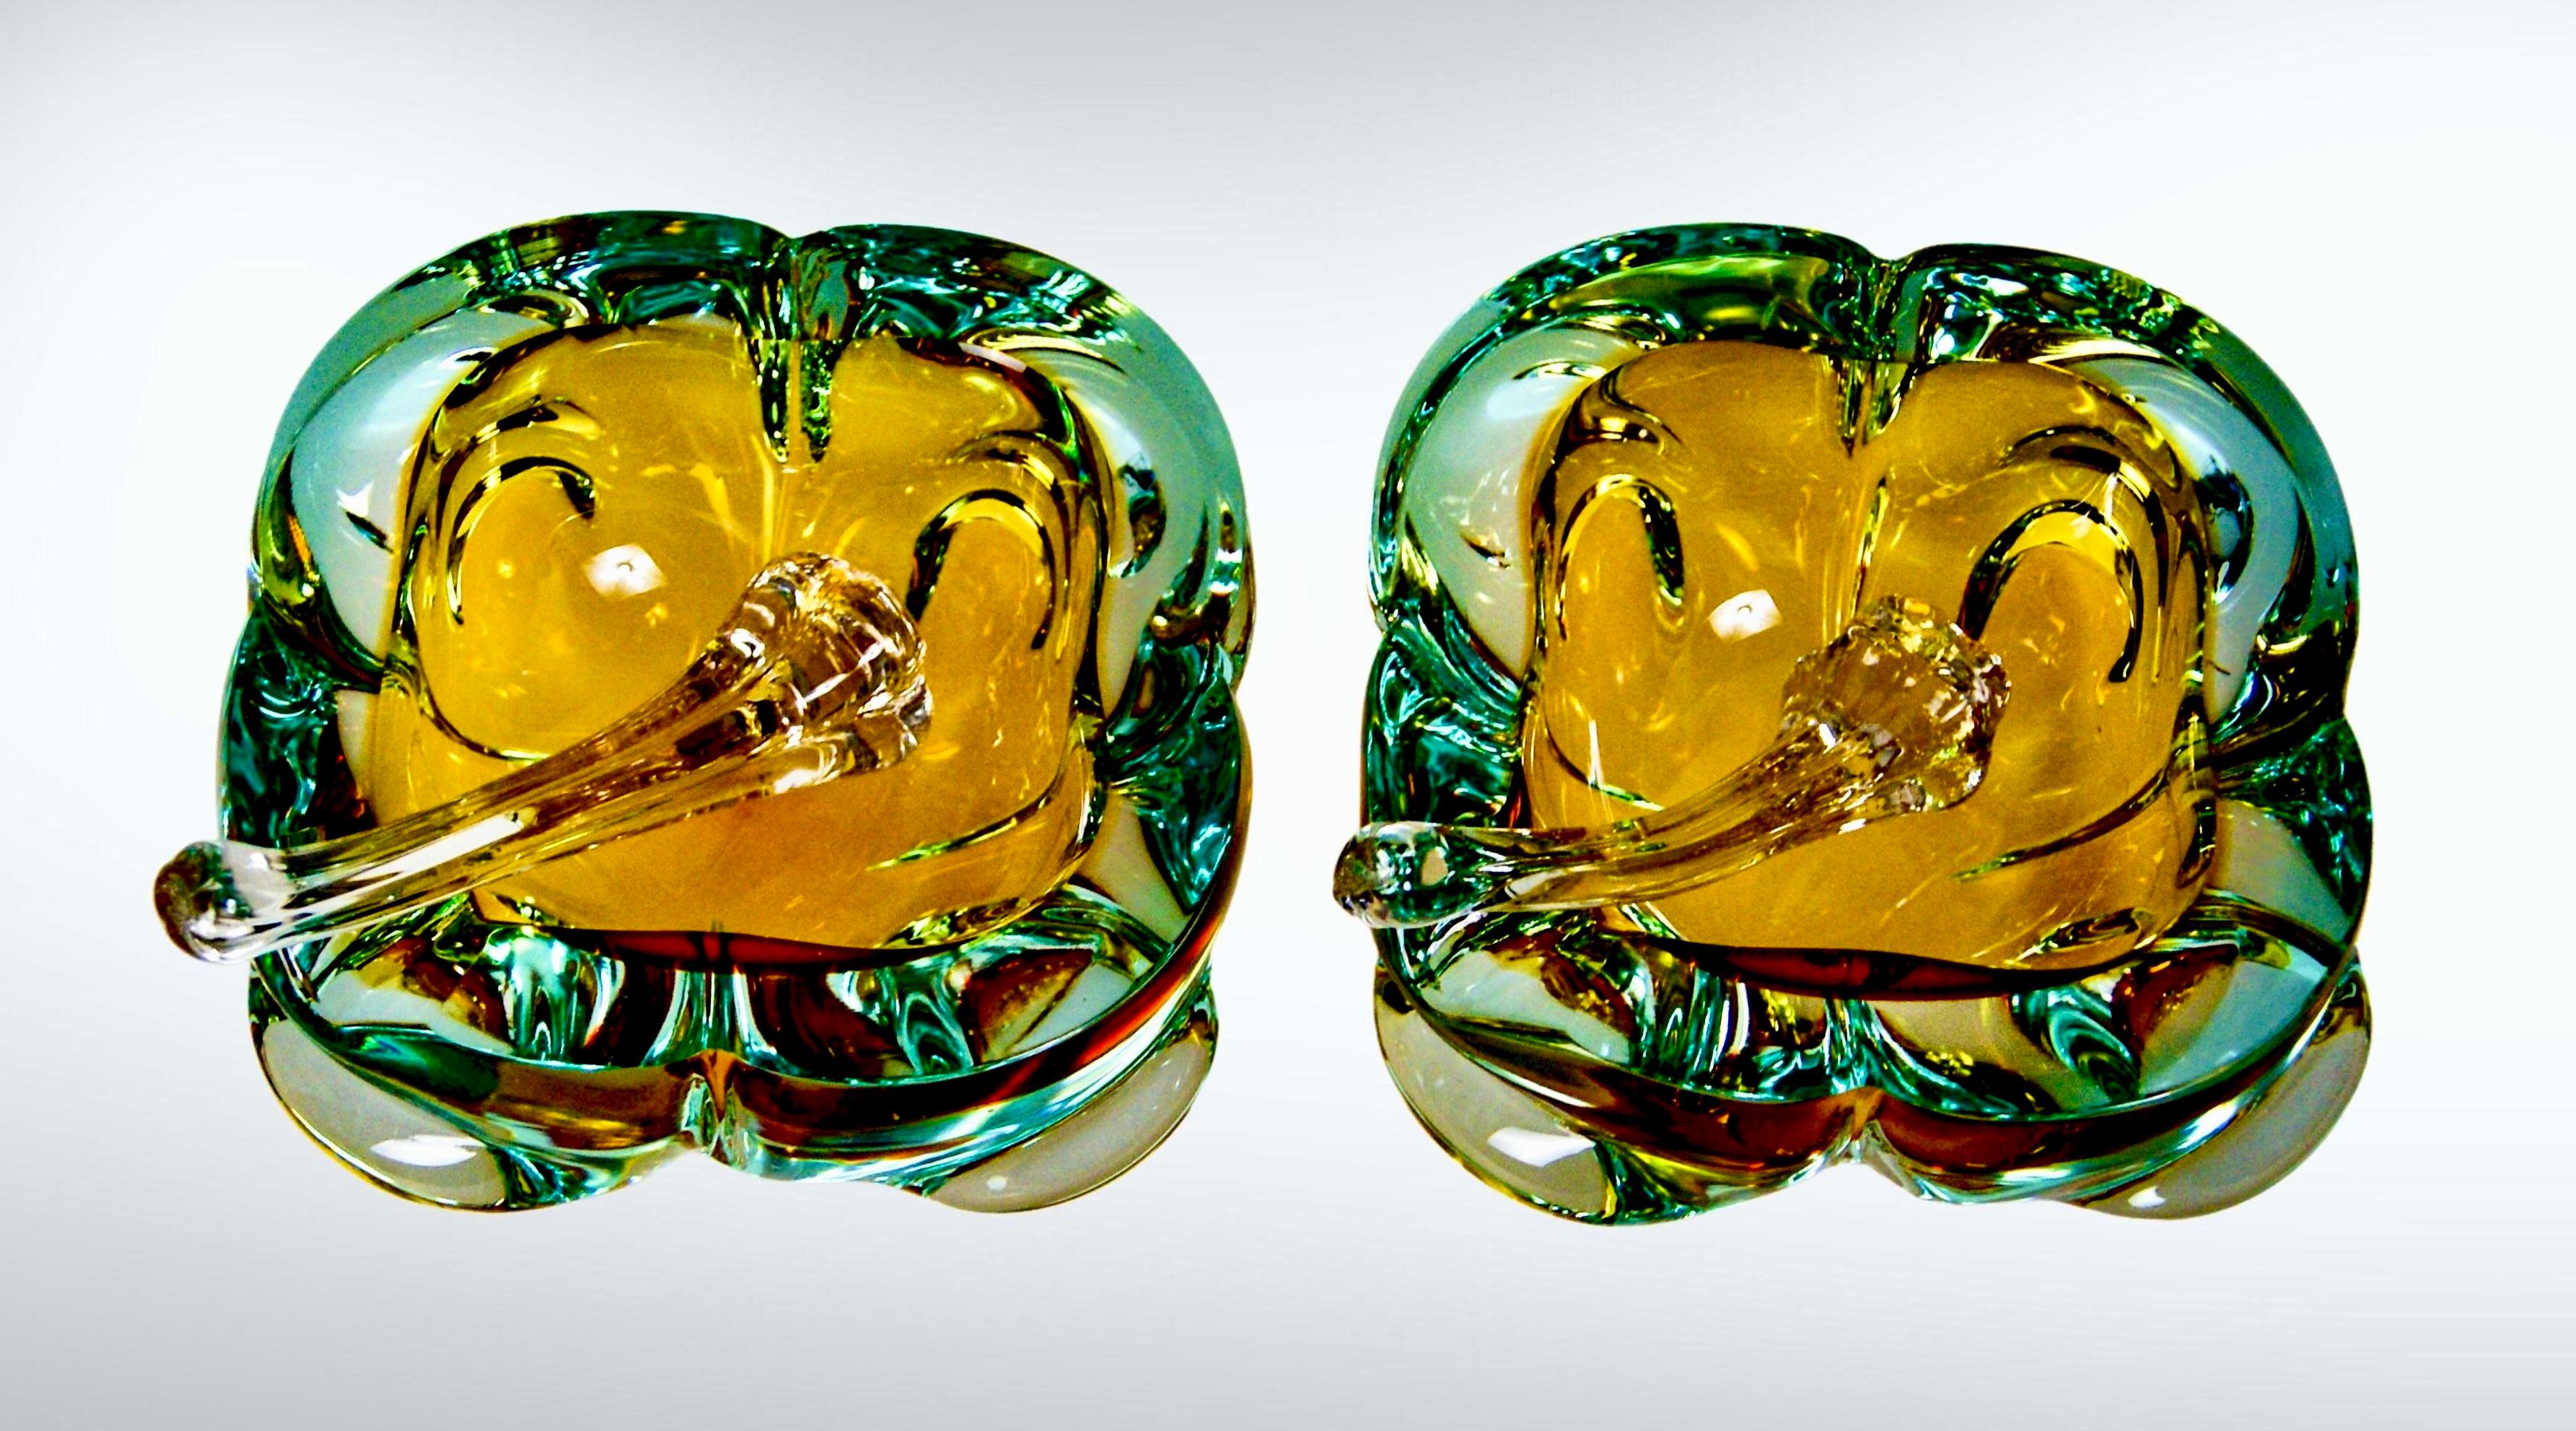 Pair of 2 Murano sommerso glass cigar ashtrays and accompanying stubbers.
Attributed to master glass artisan Flavio Poli, circa 1950s.
Chunky amber colored glass with a submerged aqua blue/green coloring.
The bowls each have 1 wide bridge/cigar